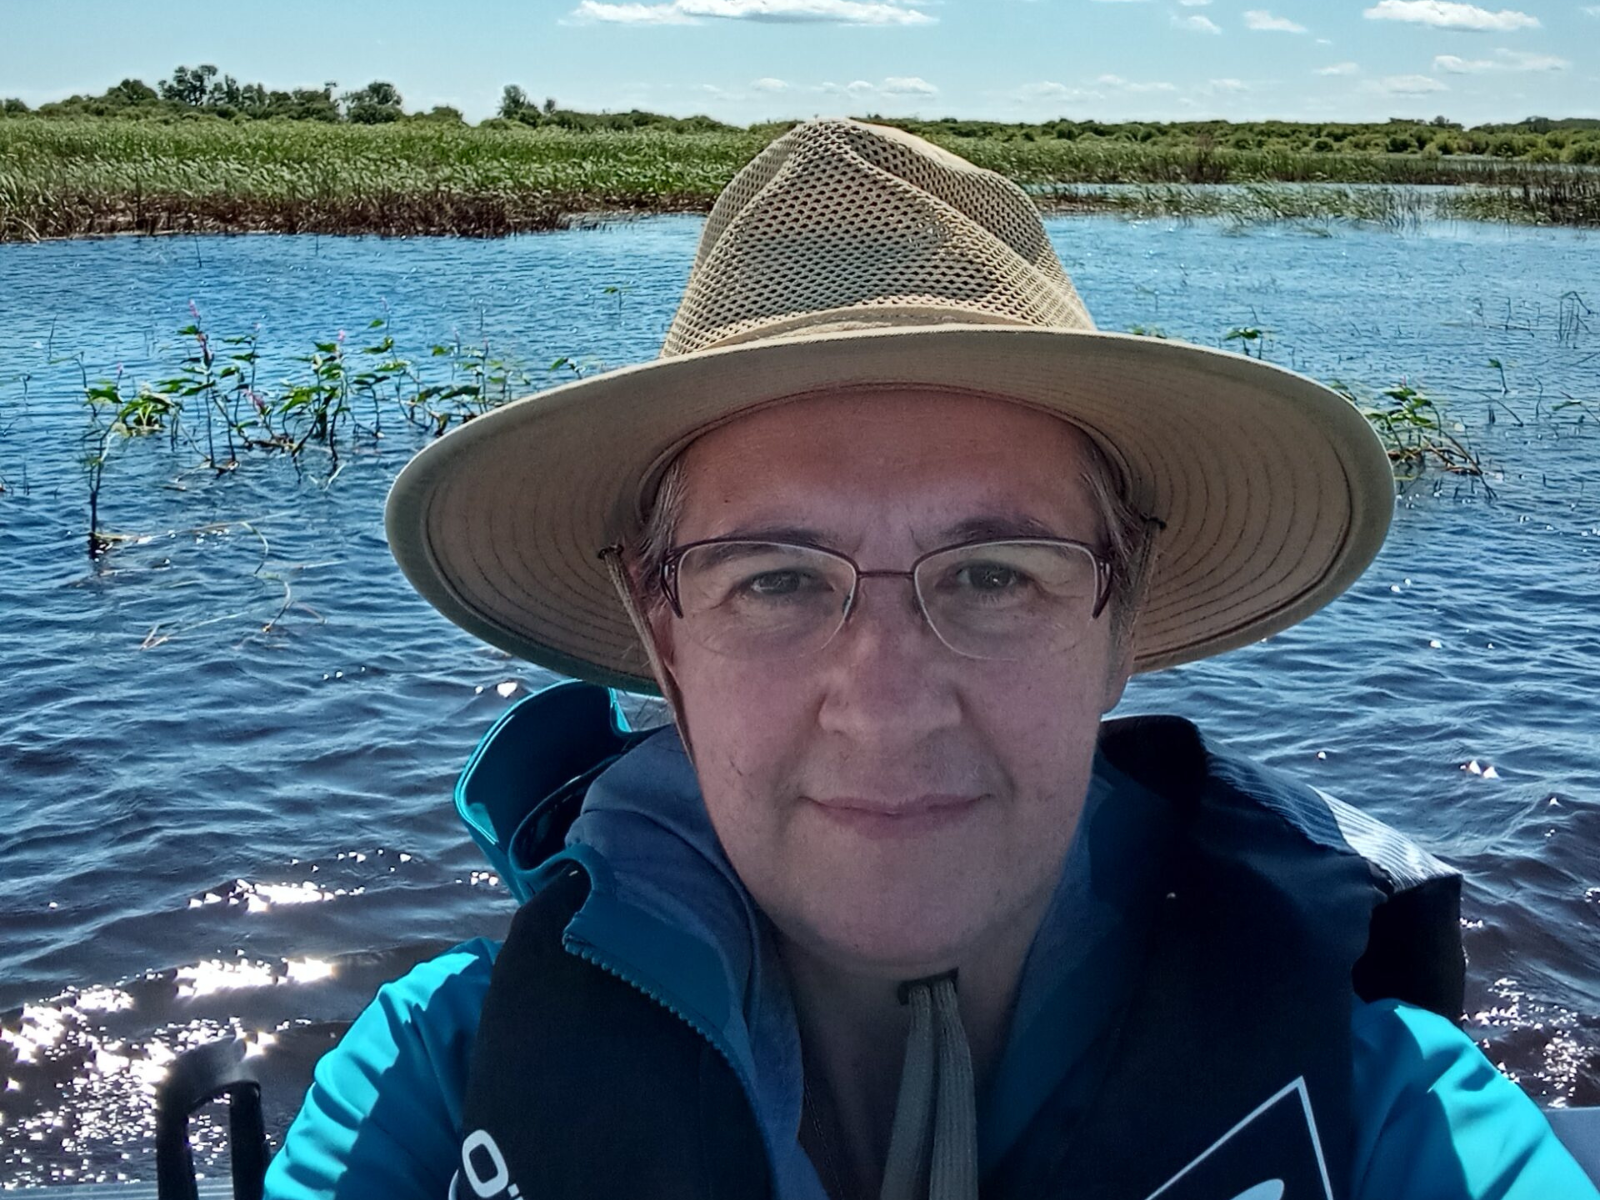 A selfie taken by Dr. Diana Bizecki Robson showing her sitting on a boat with a body of water and shoreline in the background. She is wearing a life jacket, a wide-brimmed sun hat, and glasses.